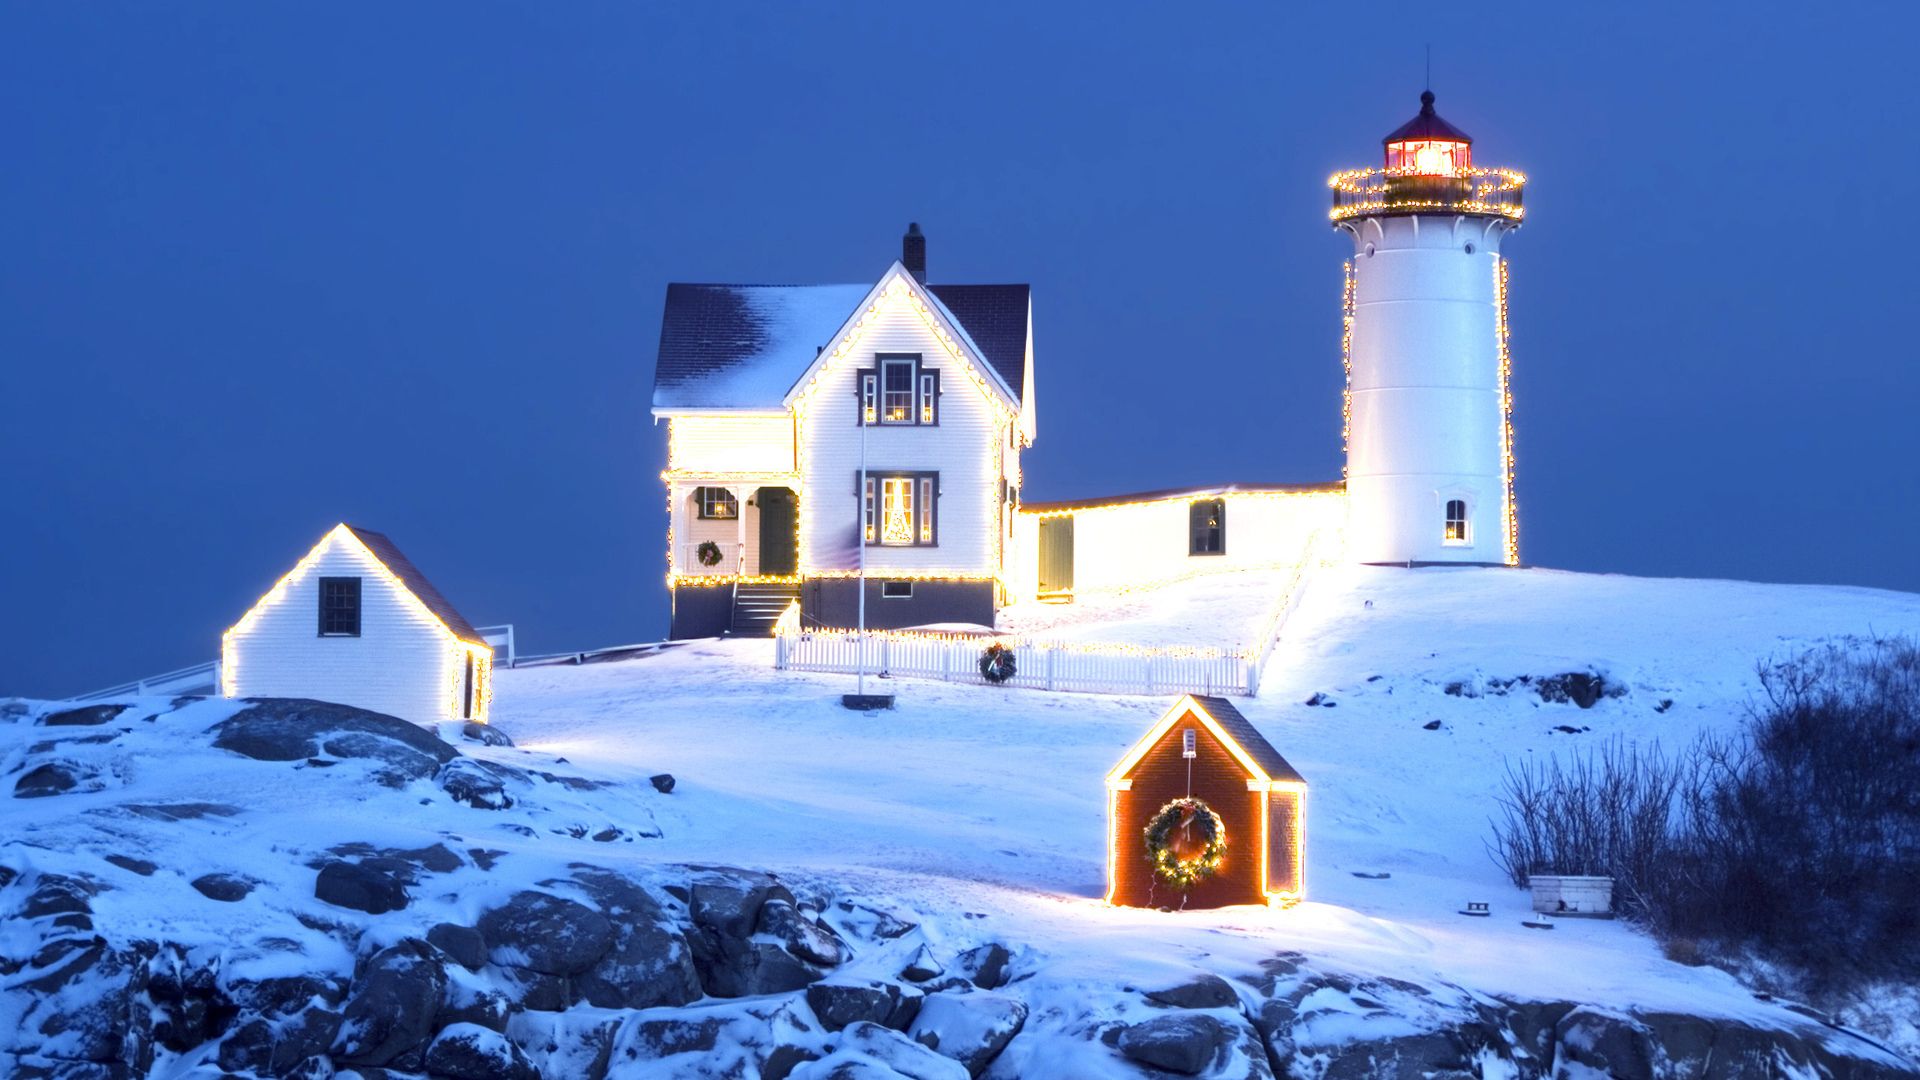 A lighthouse with Christmas lights on it - Cozy, winter